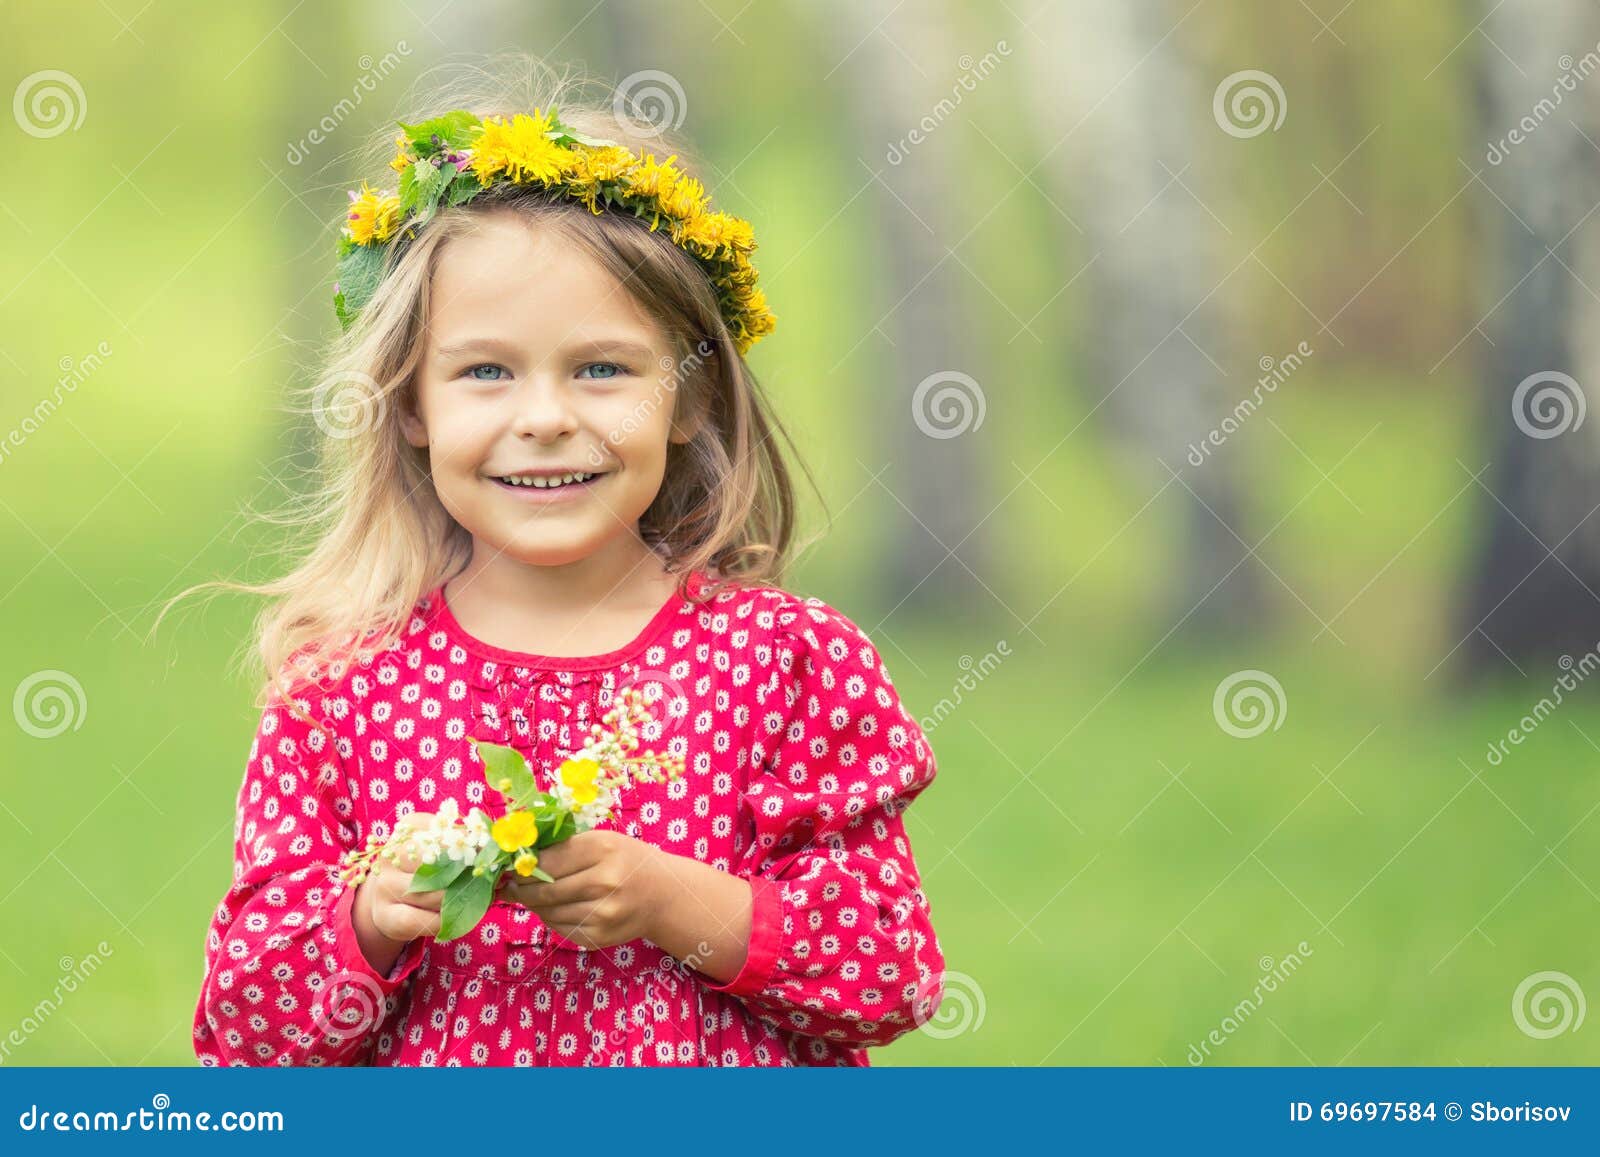 Little girl in spring park stock photo. Image of happiness - 69697584